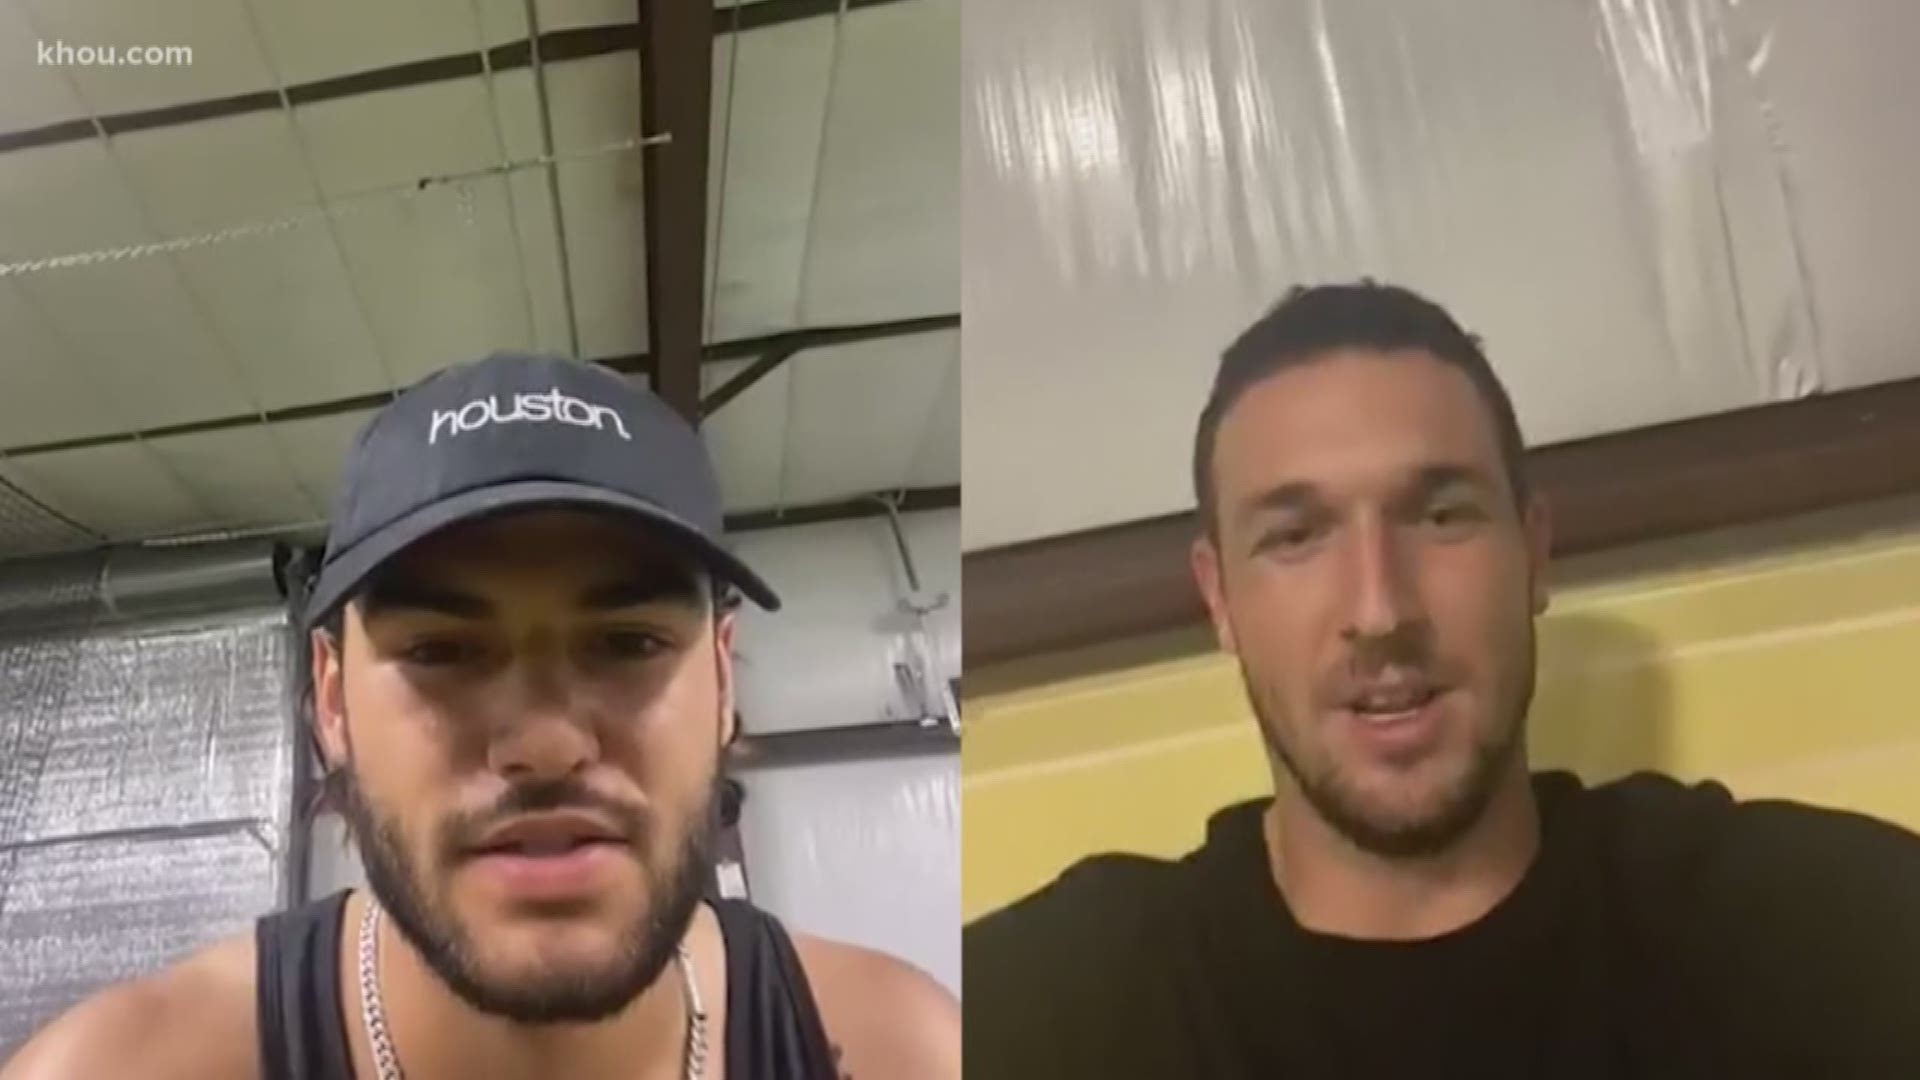 While the coronavirus pandemic canceled their prom, Lance McCullers and Alex Bregman gave them memories they'll never forget.